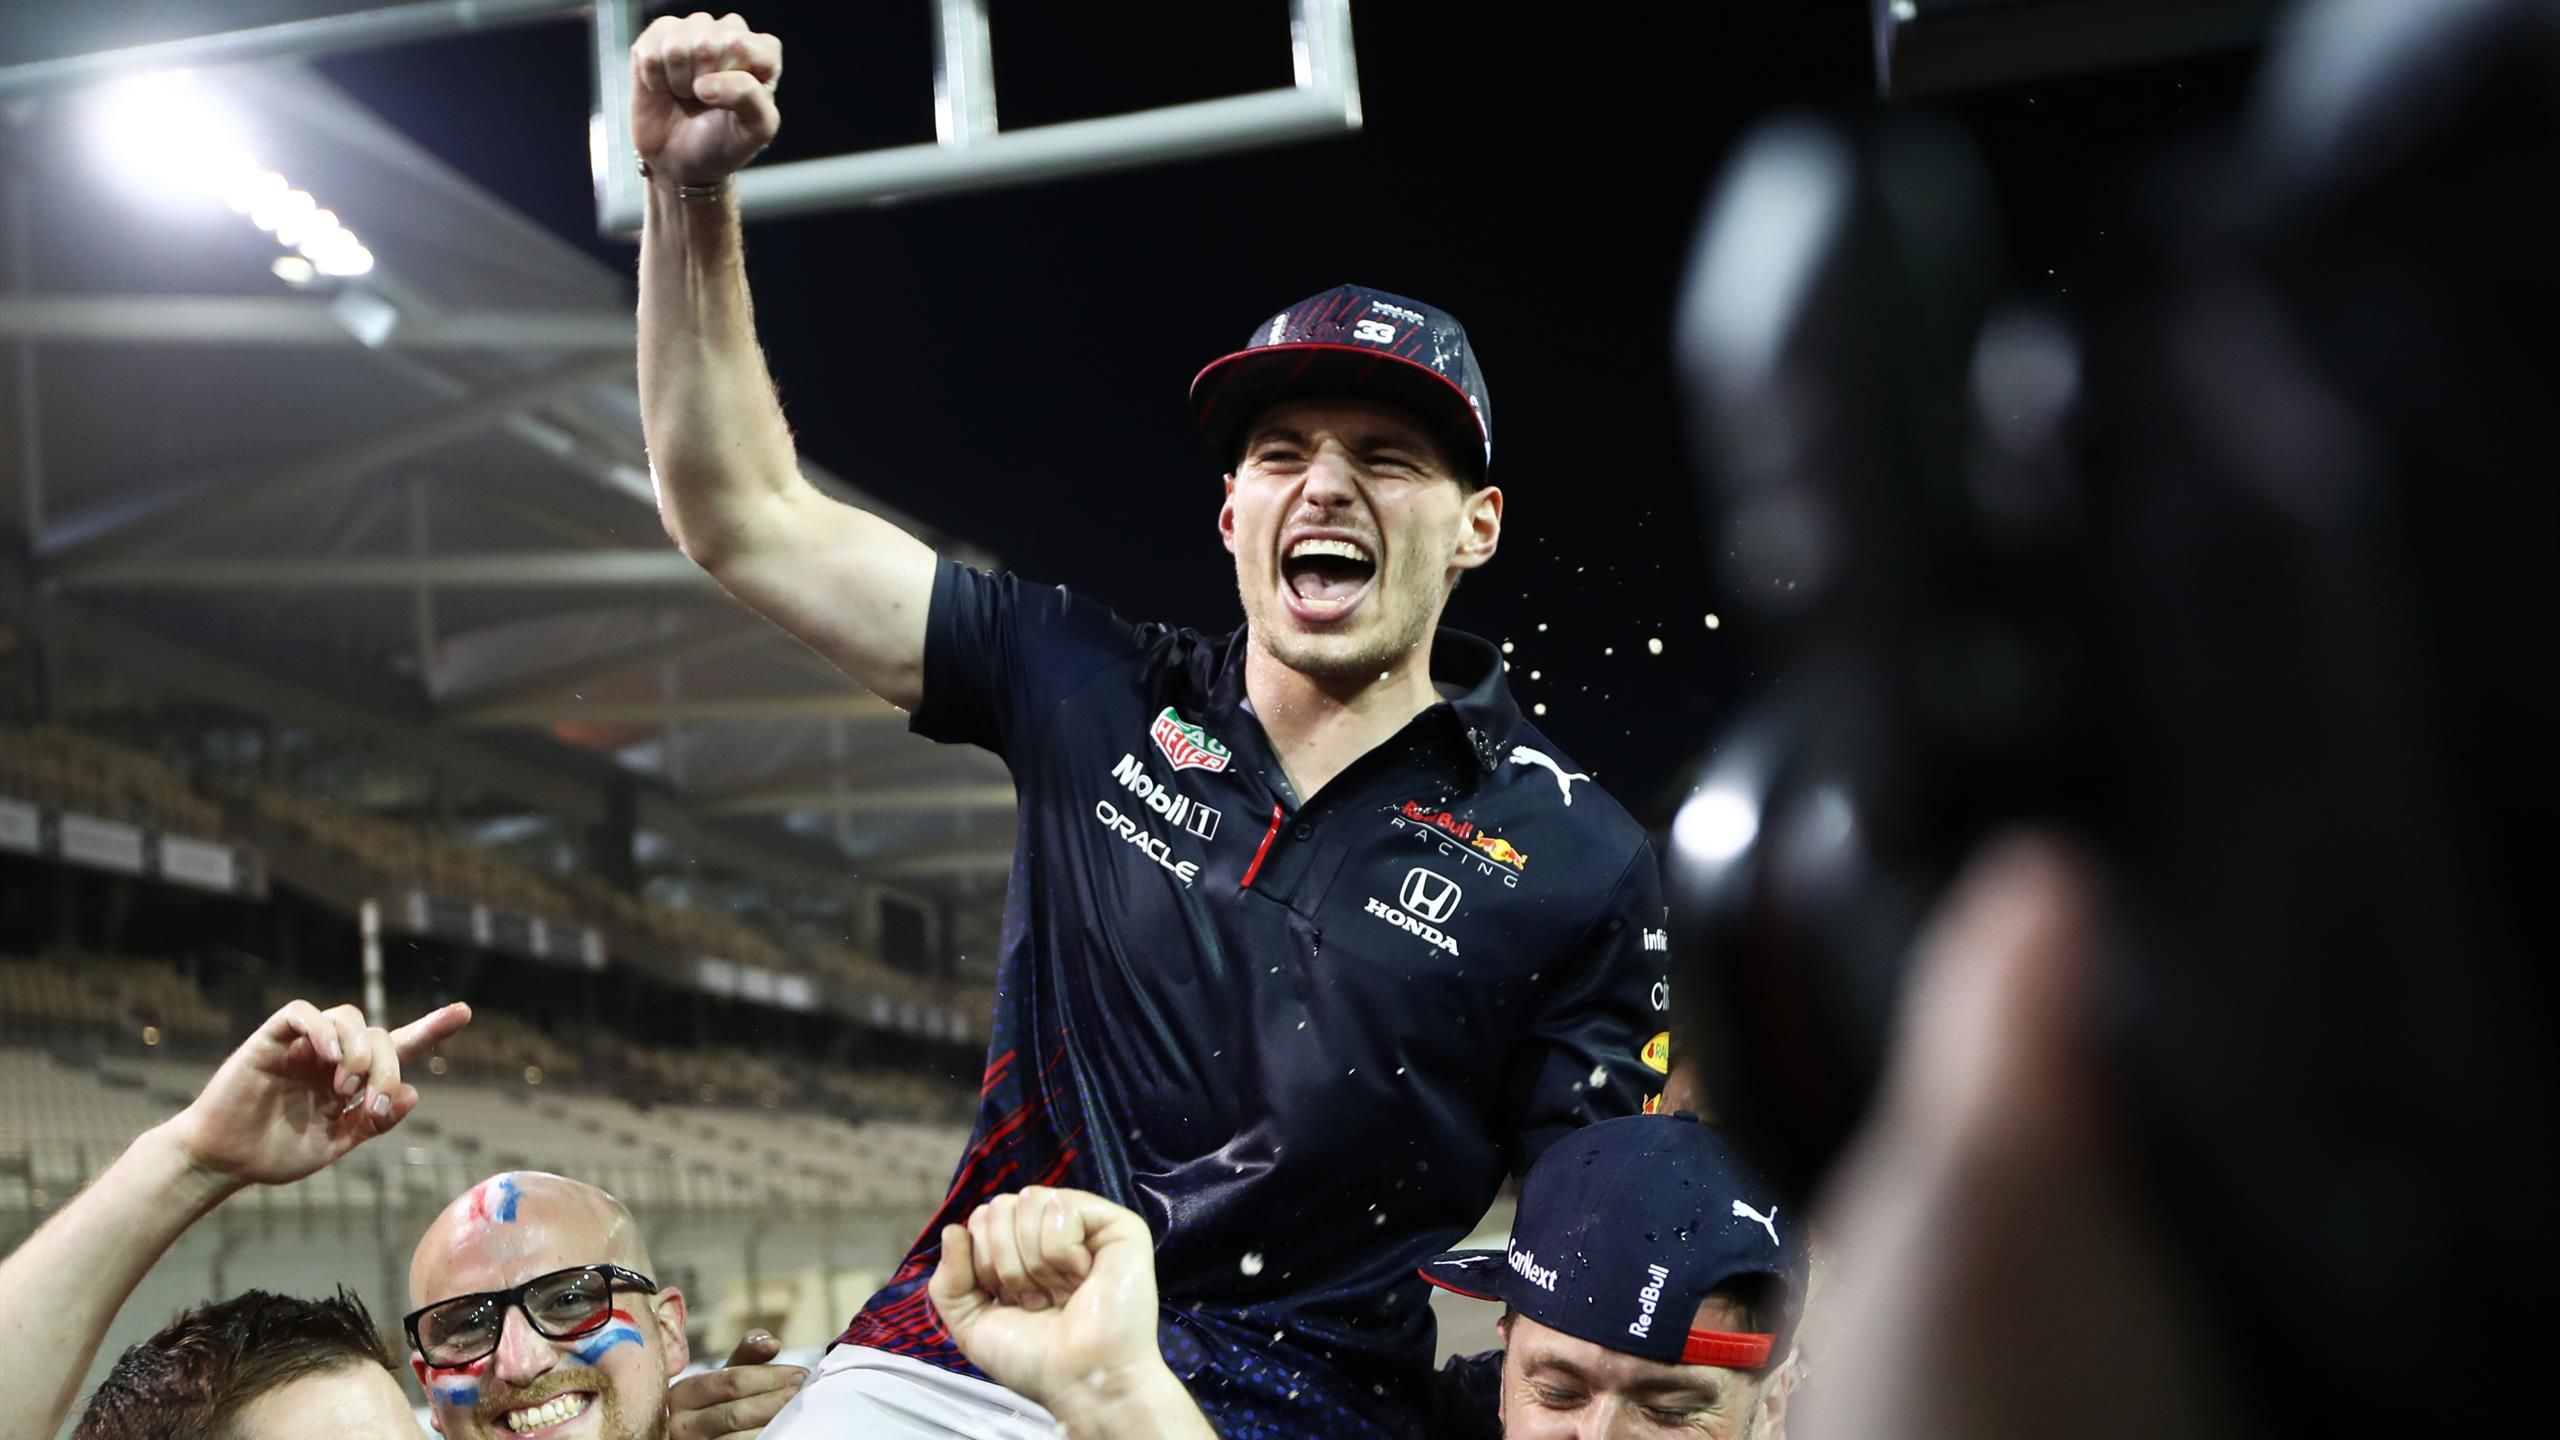 Max Verstappen reveals Lewis Hamilton and Mercedes boss Toto Wolff congratulated him after title win